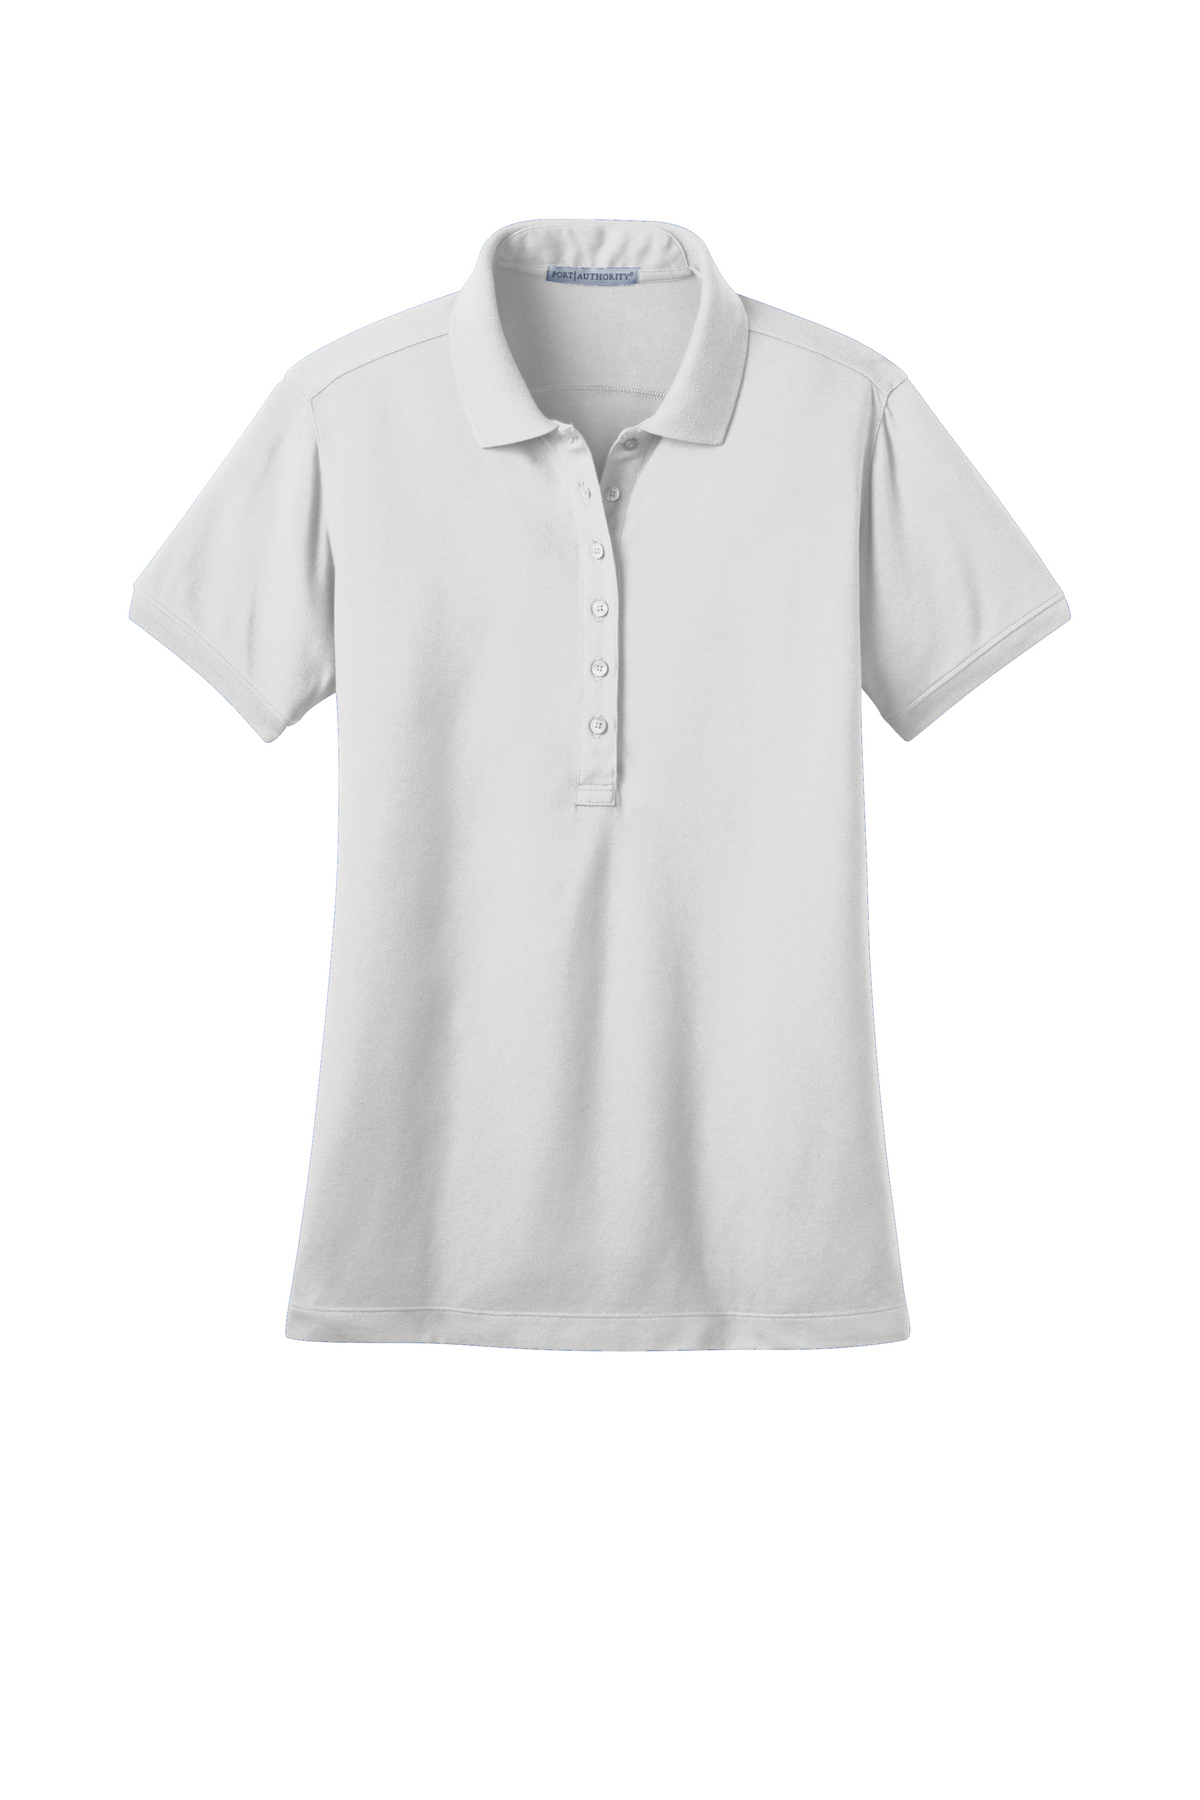 6 Qty Ladies Stretch Pique Polo 40.38 Per Promotional Product w/Your Logo